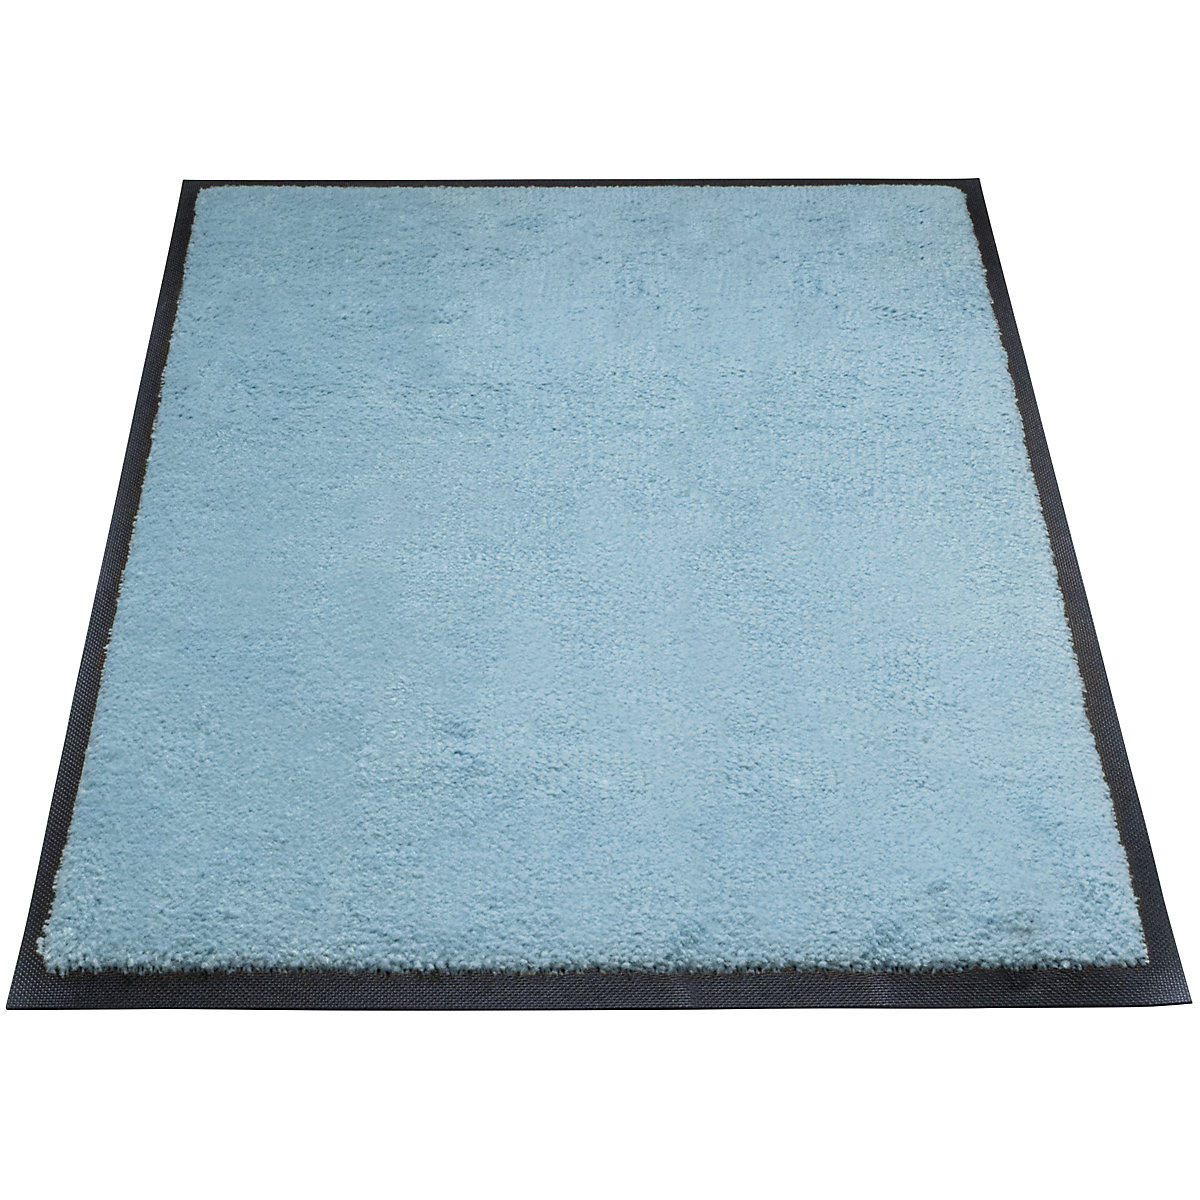 EAZYCARE STYLE entrance matting, LxW 850 x 750 mm, pearl gentian blue-2